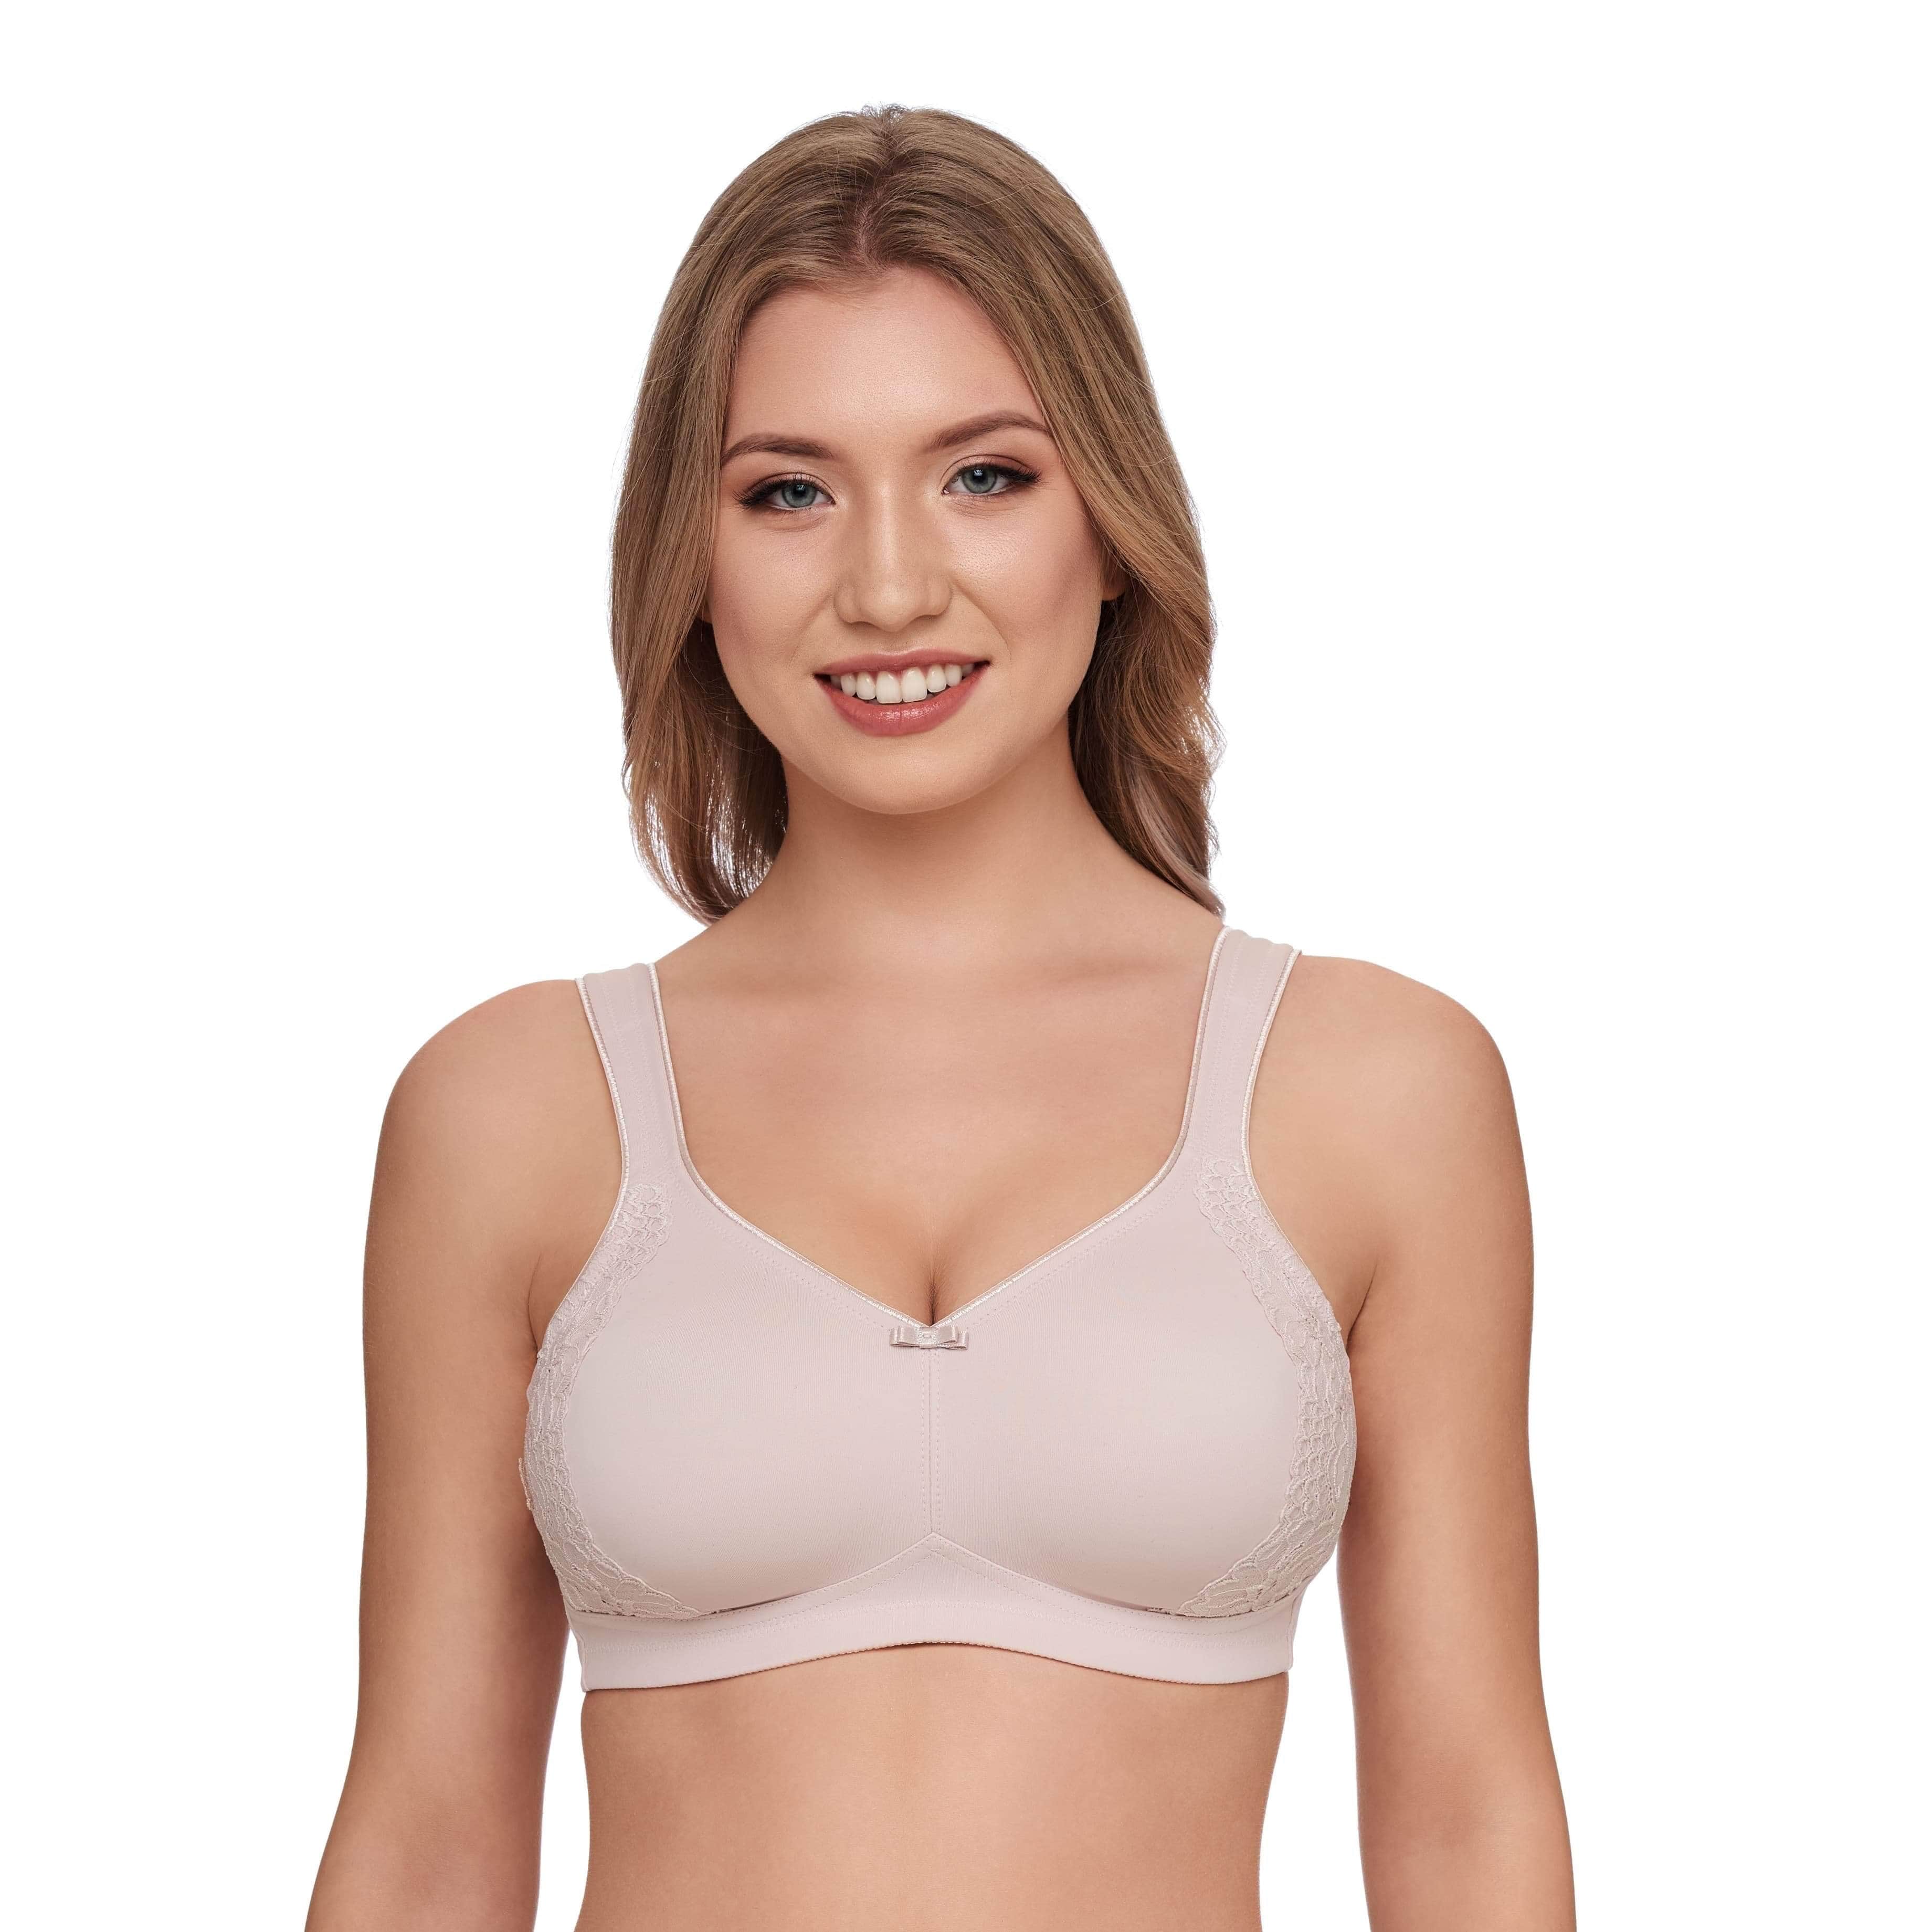 Susa Bra 14B / Nude London from Illusions Lingerie in Melbourne